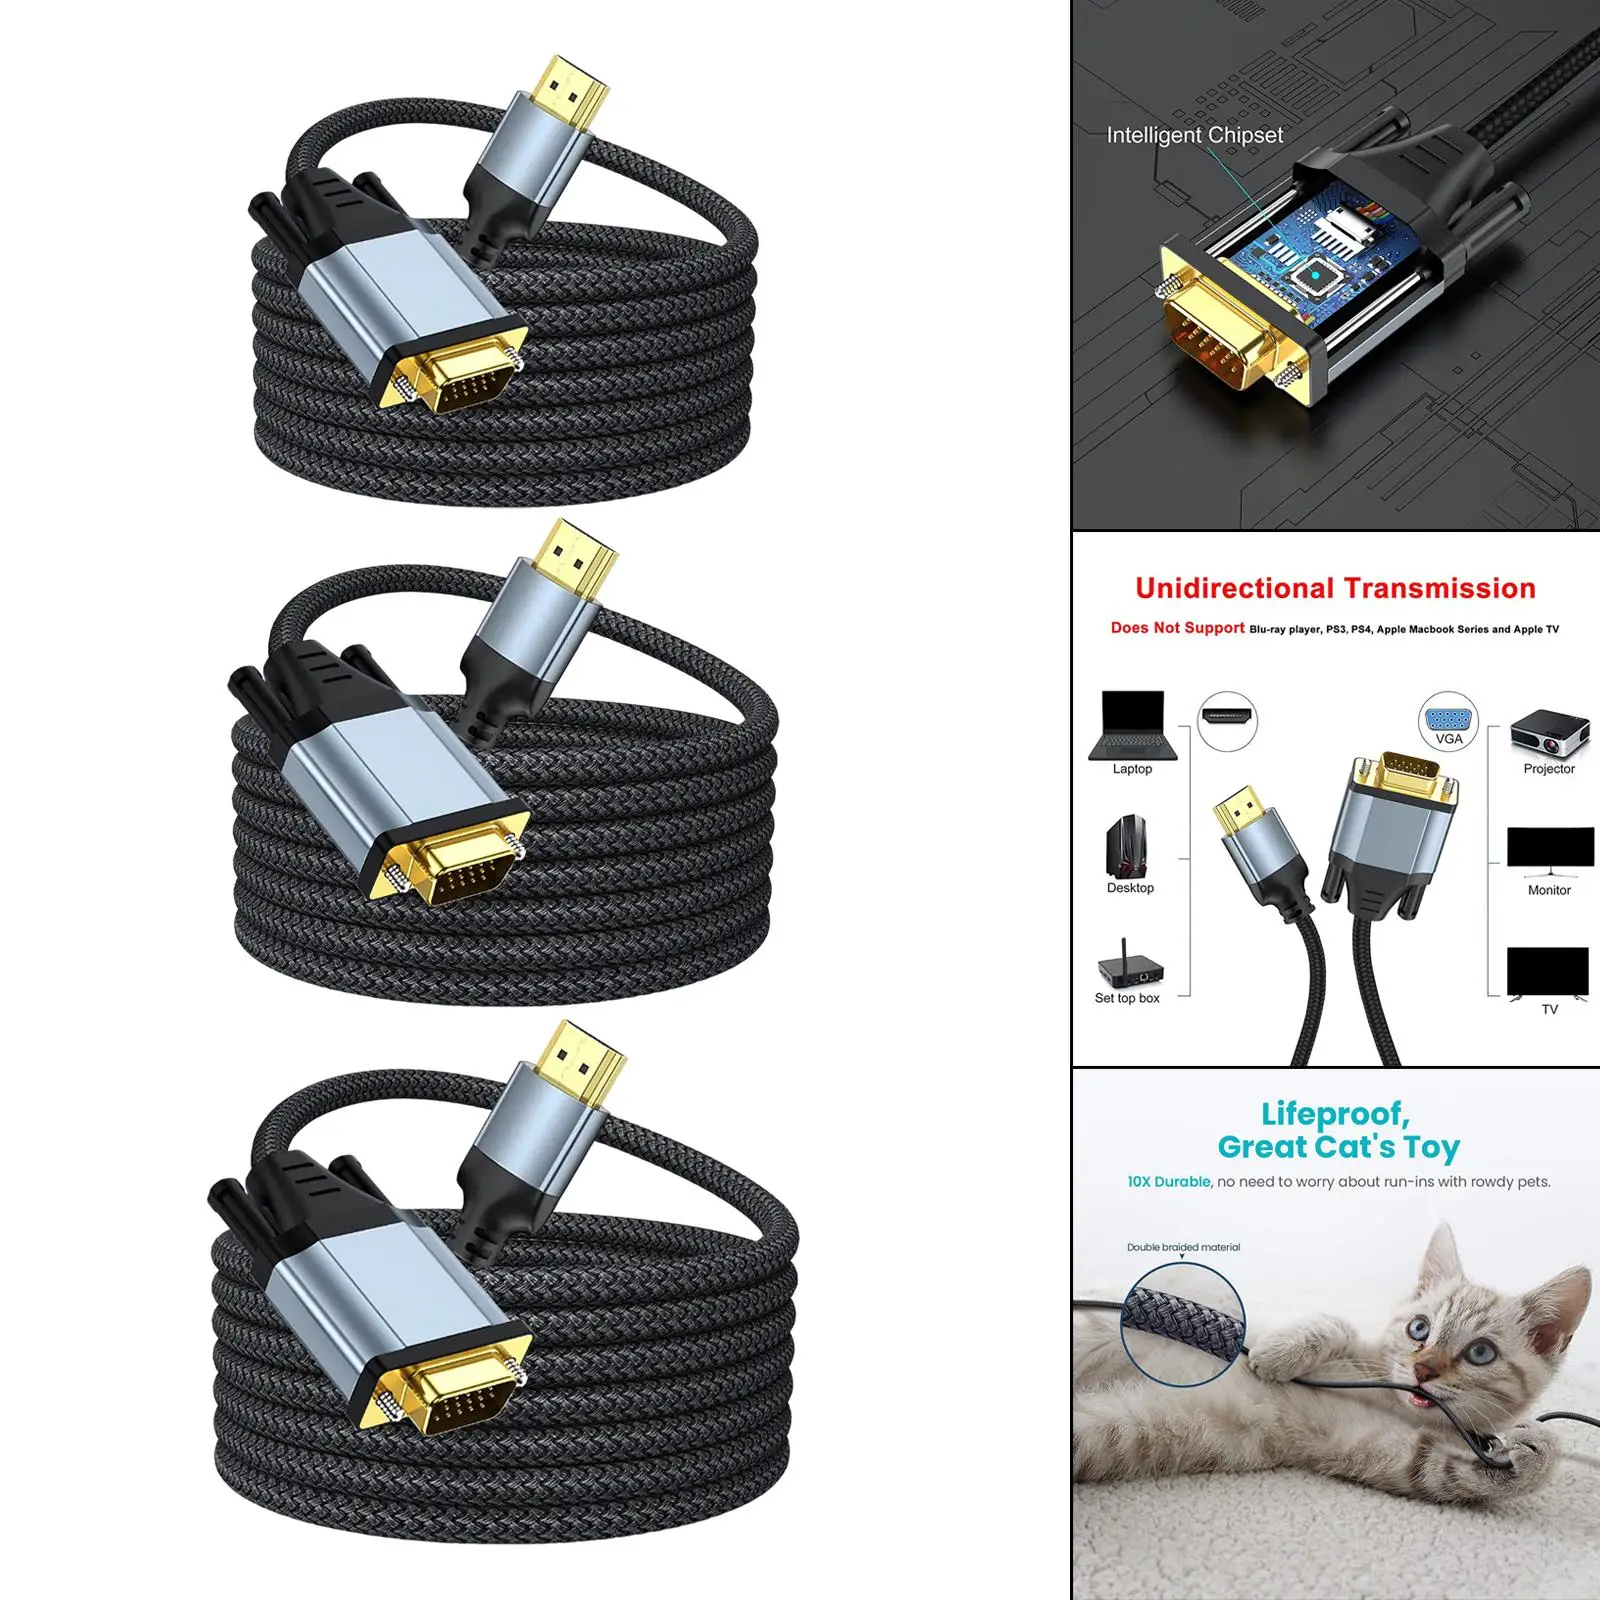   to VGA Cable   Input to VGA Output Converter Cord Male to Male for Notebook Desktop Computer Monitor